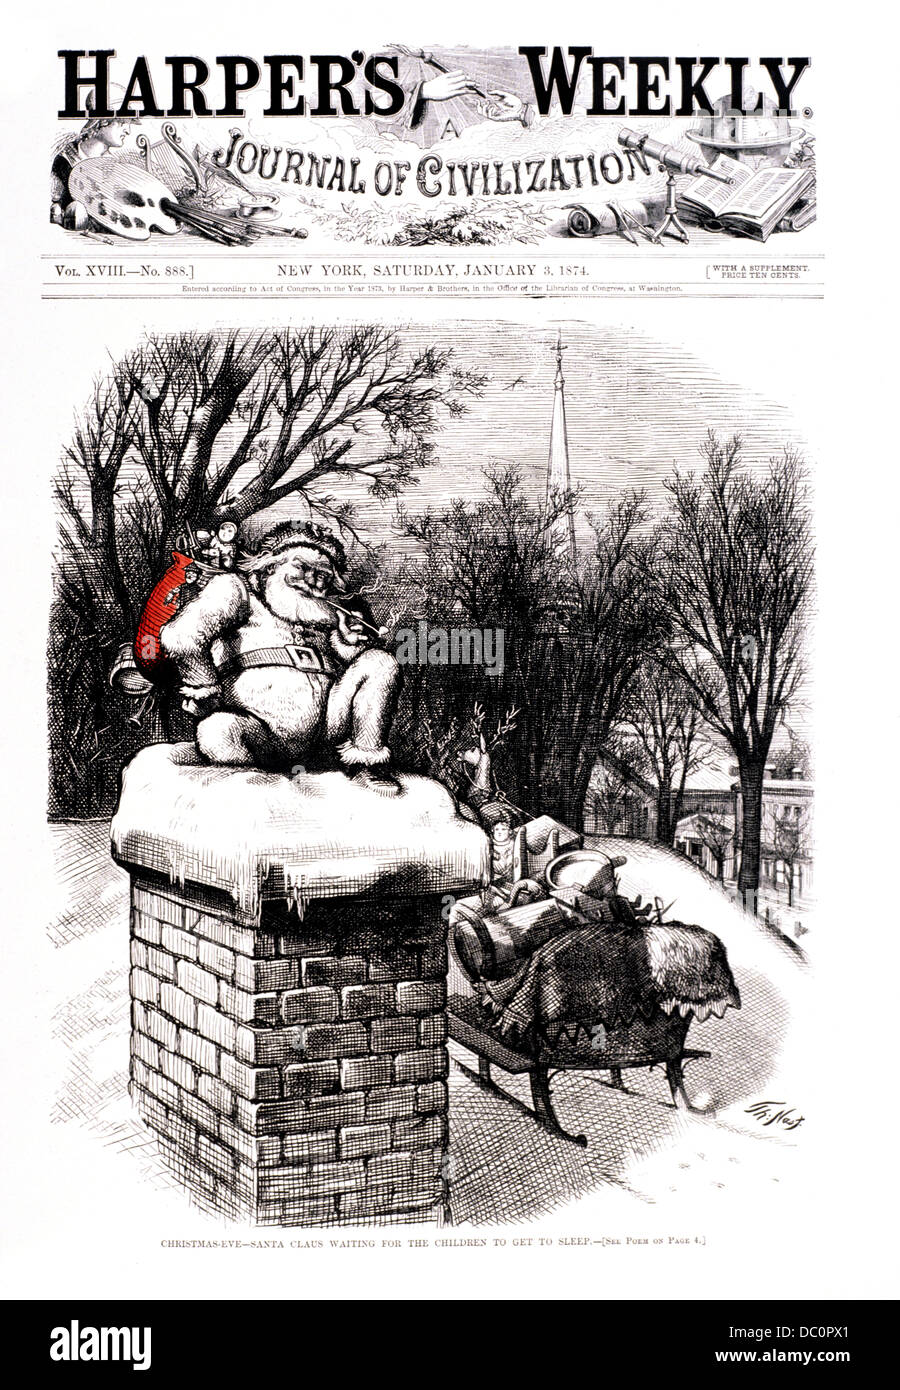 SANTA ABOUT TO GO DOWN CHIMNEY RED BAG TOY THOMAS NAST DRAWING HARPER'S WEEKLY JANUARY 3 1874 1800s Stock Photo